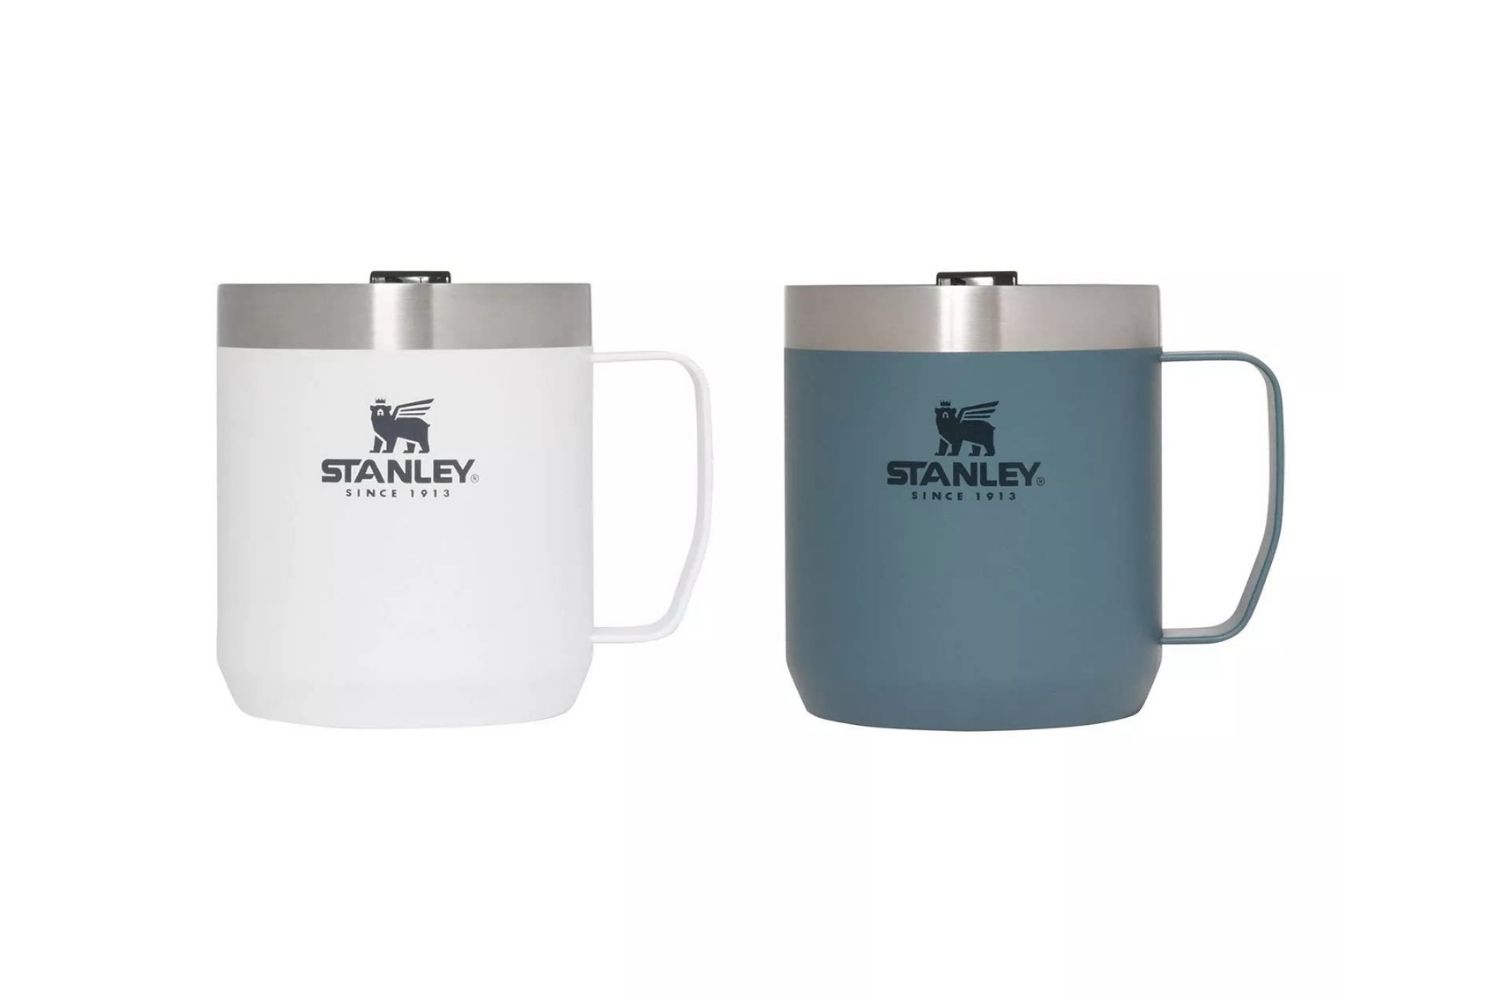 Personalized Engraved Stanley Quencher 40 Oz 30 Oz 20 Oz Dishwasher Safe Tumbler  Stanley Brand Cup With Handle Engraved NOT Stickers 